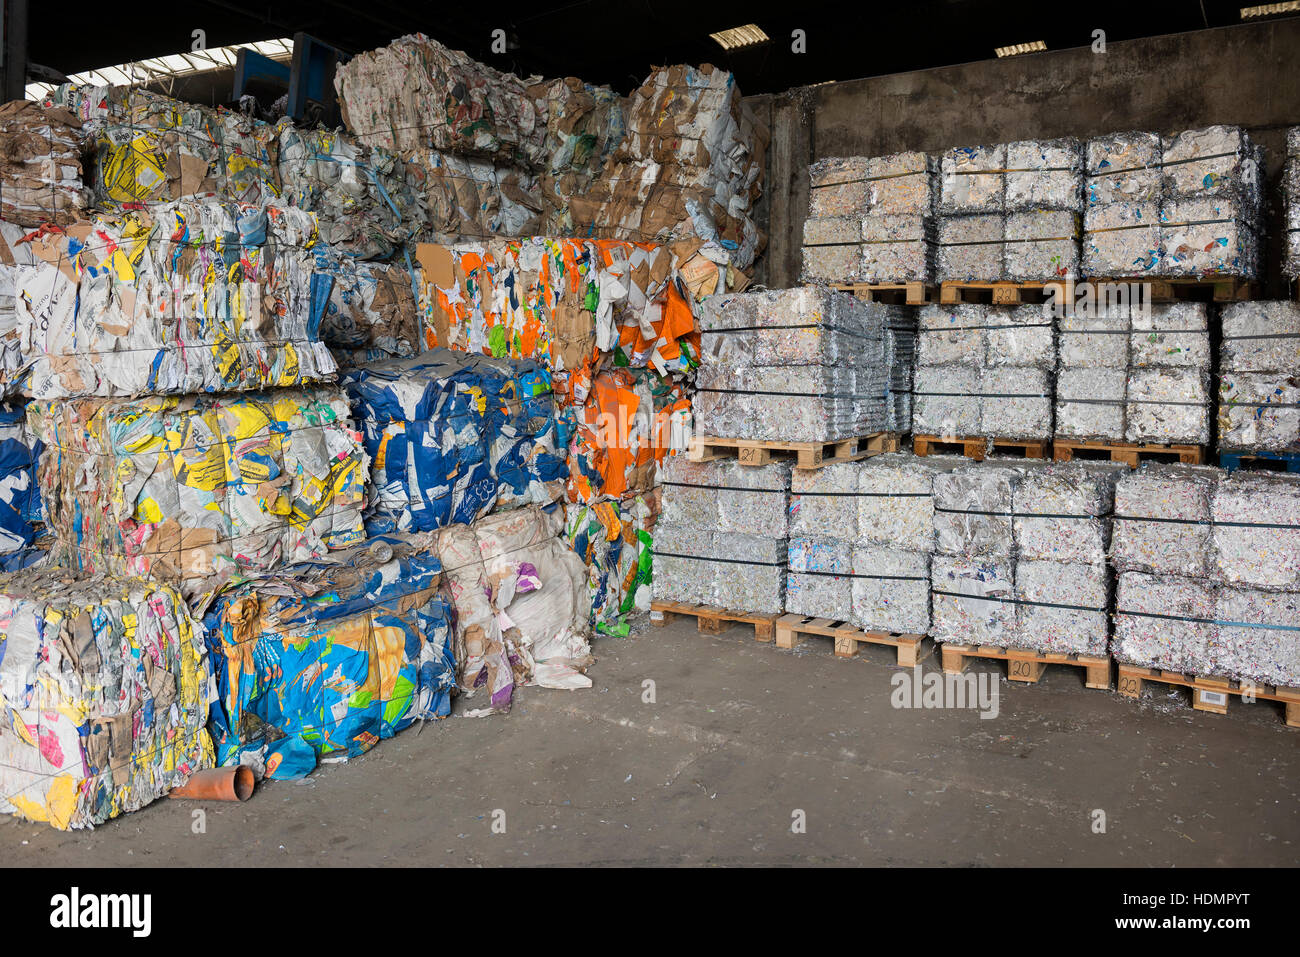 Sorted and baled garbage, plastic, aluminum, paper, recycling Stock Photo